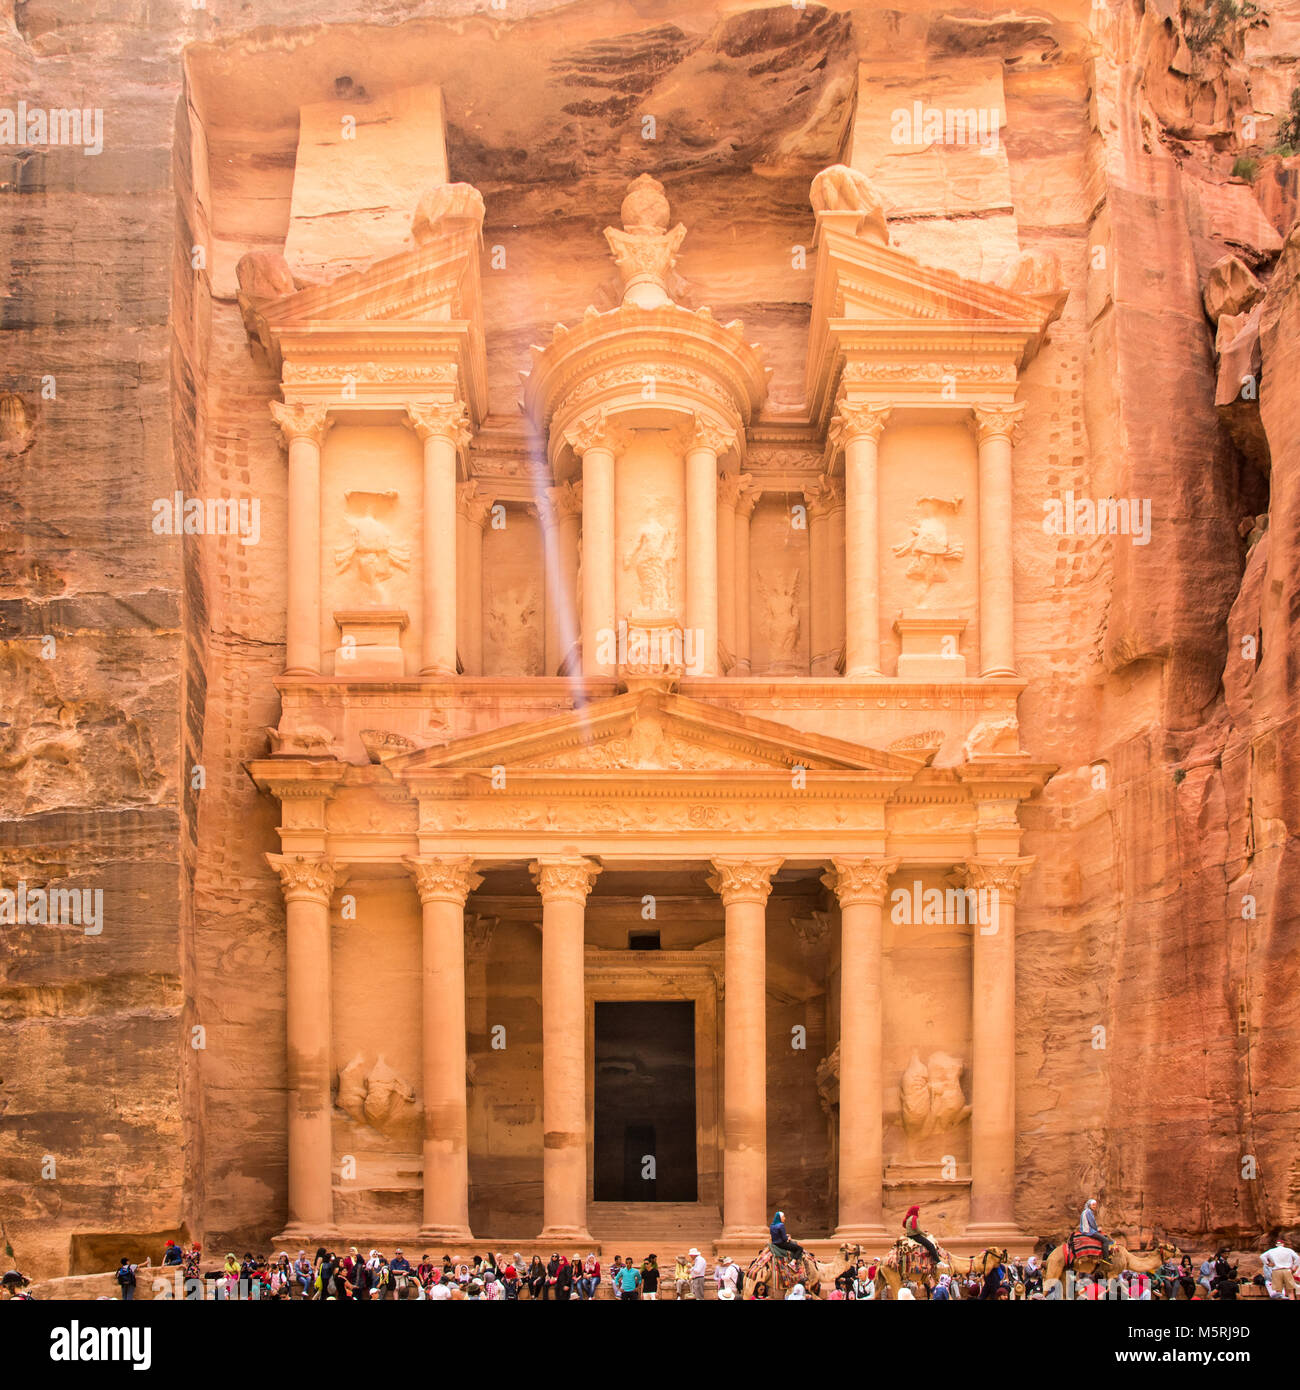 PETRA, JORDAN - APRIL 25, 2016: People near al-Khazneh temple (The Treasury) in ancient Petra. Rock-cut town Petra was established about 312 BC as the Stock Photo